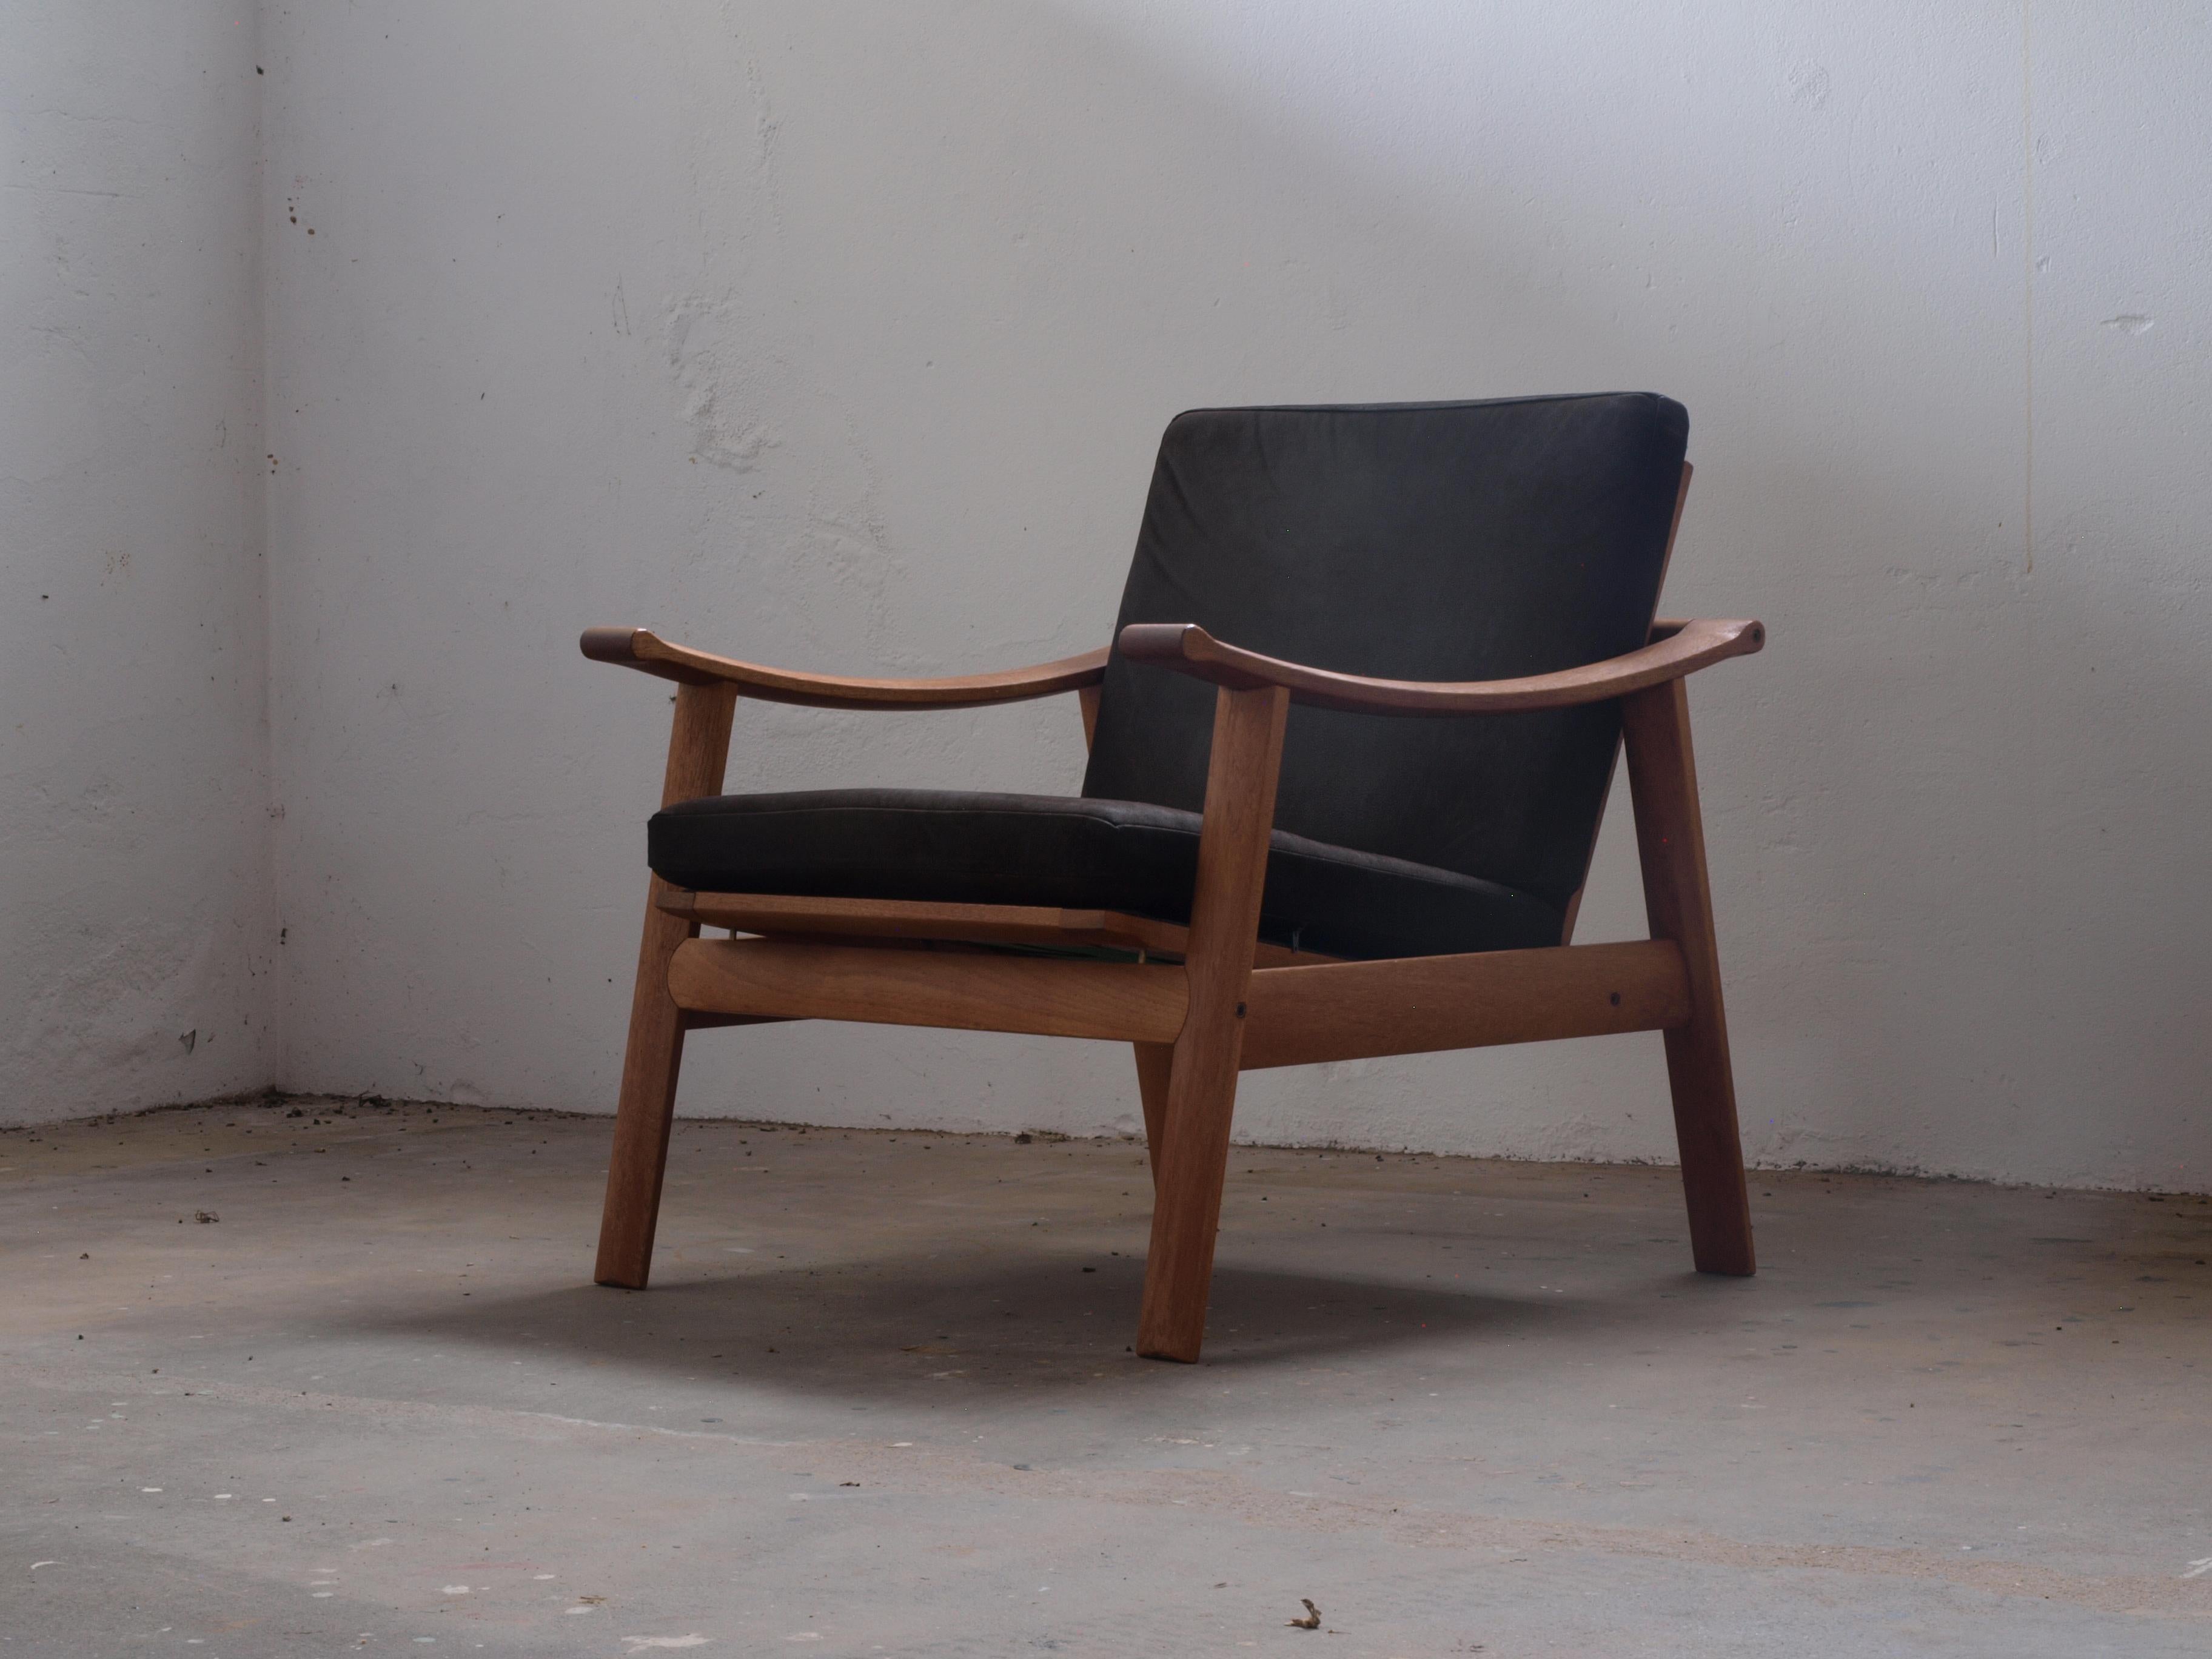 Mid-20th Century Danish Spade Chairs in Teak in the style of Finn Juhl, 1960s For Sale